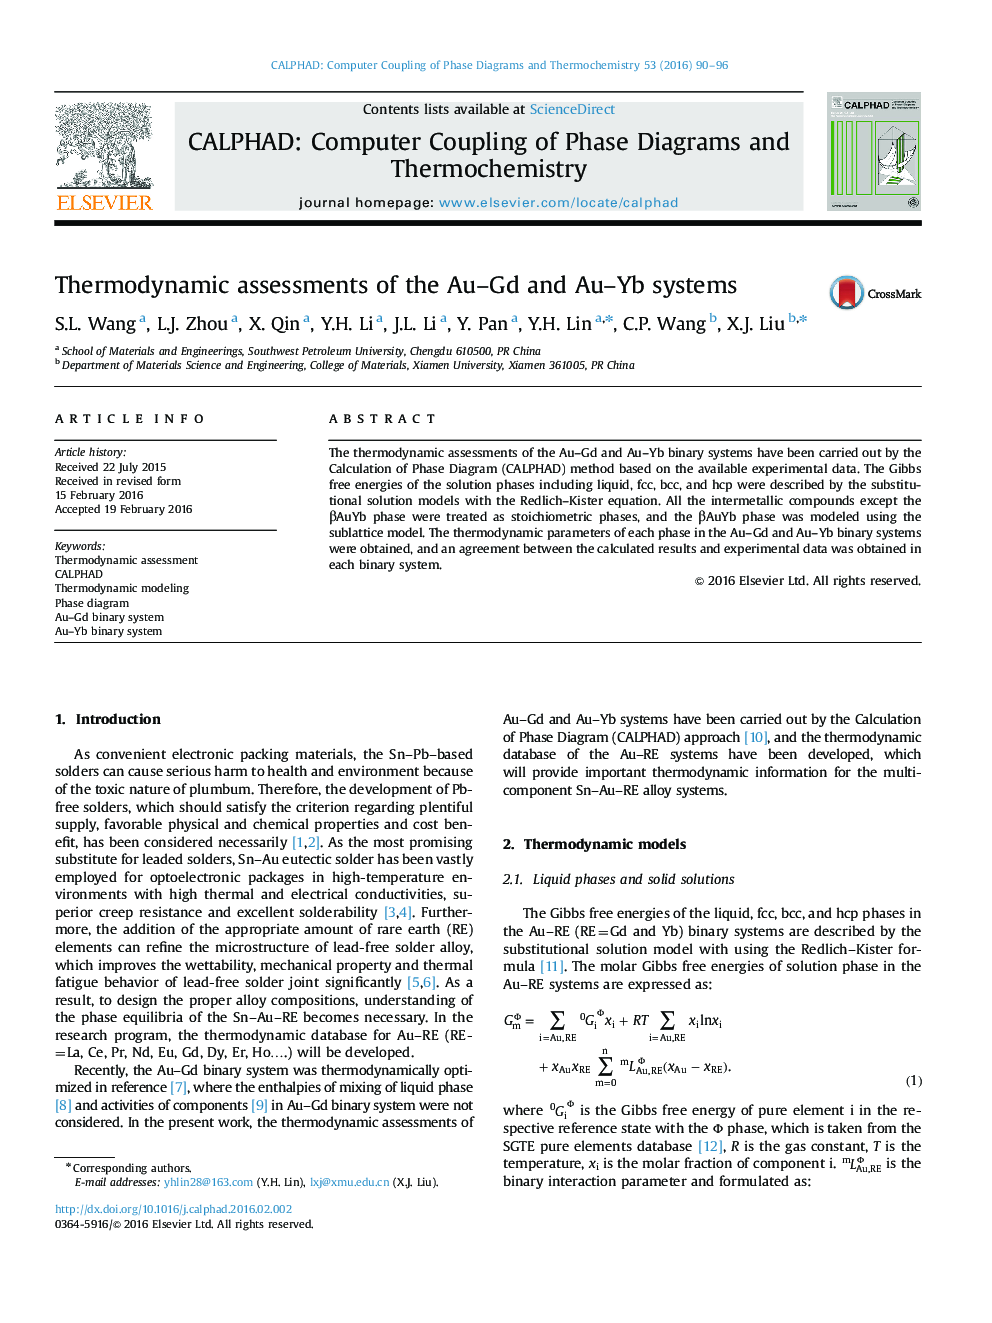 Thermodynamic assessments of the Au-Gd and Au-Yb systems